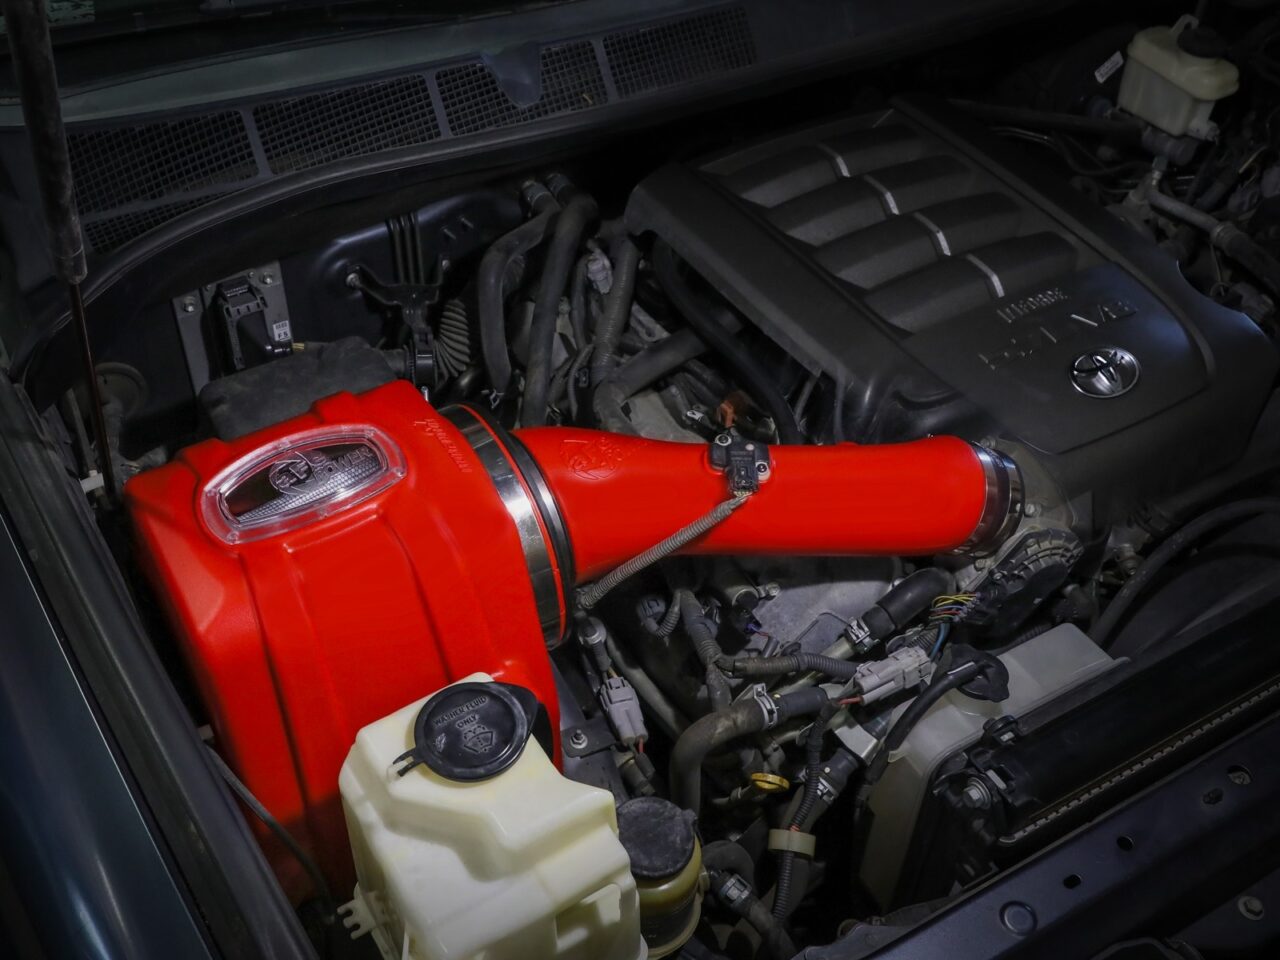 AFE aftermarket bright red rotational-molded heat-resistant plastic sealed cold air intake installed on engine of 2nd Gen V8 Toyota Tundra